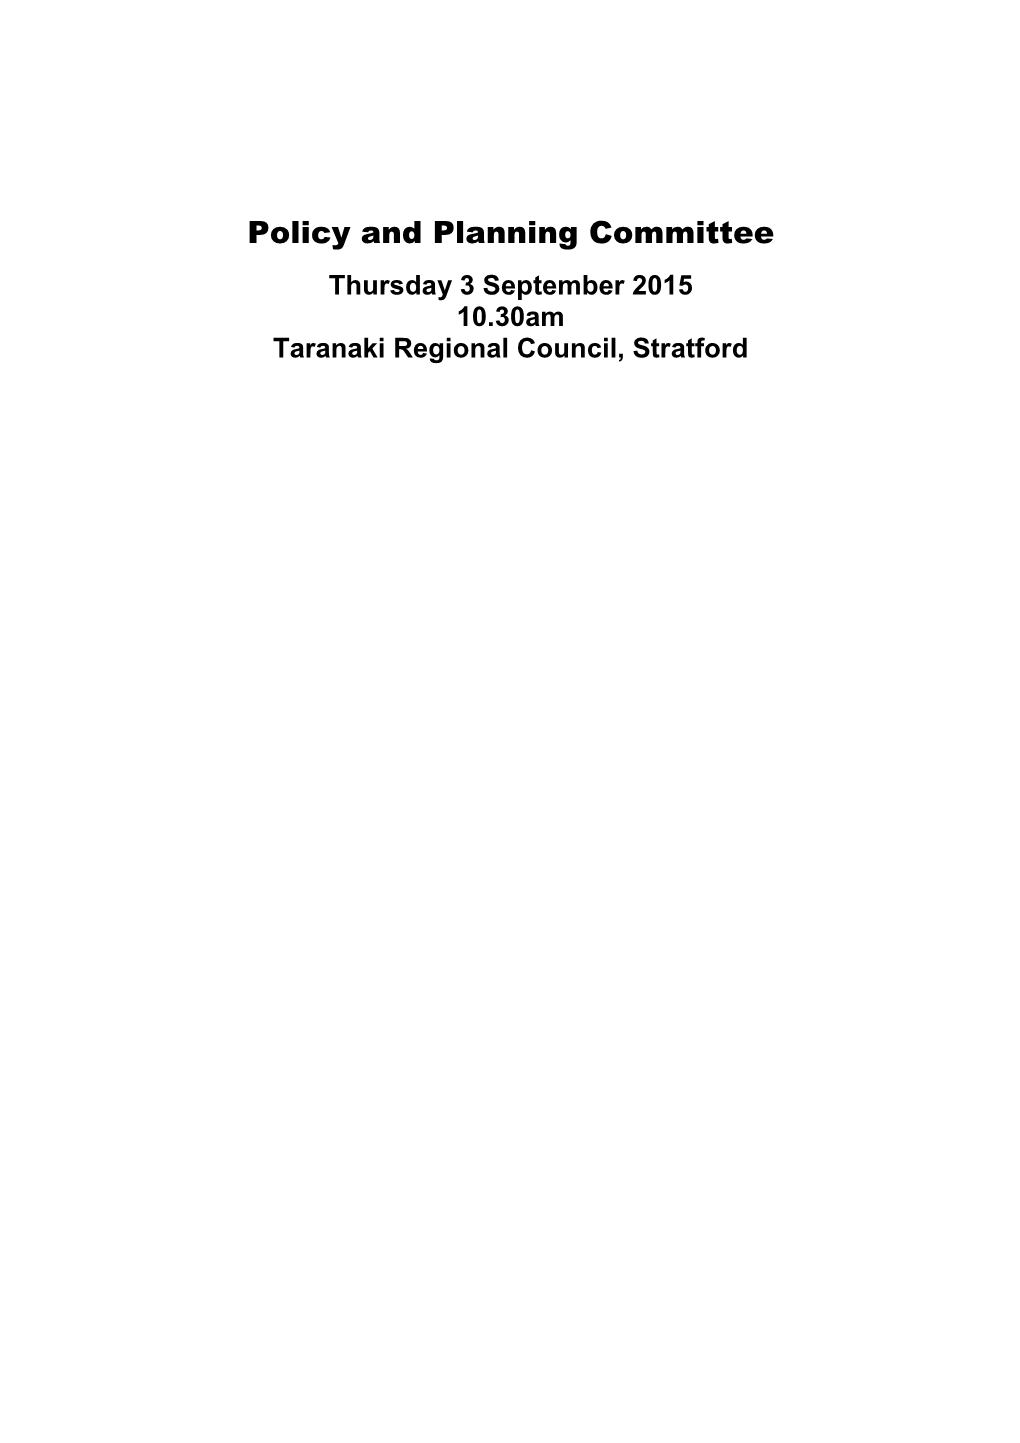 Policy and Planning Committee Agenda September 2015